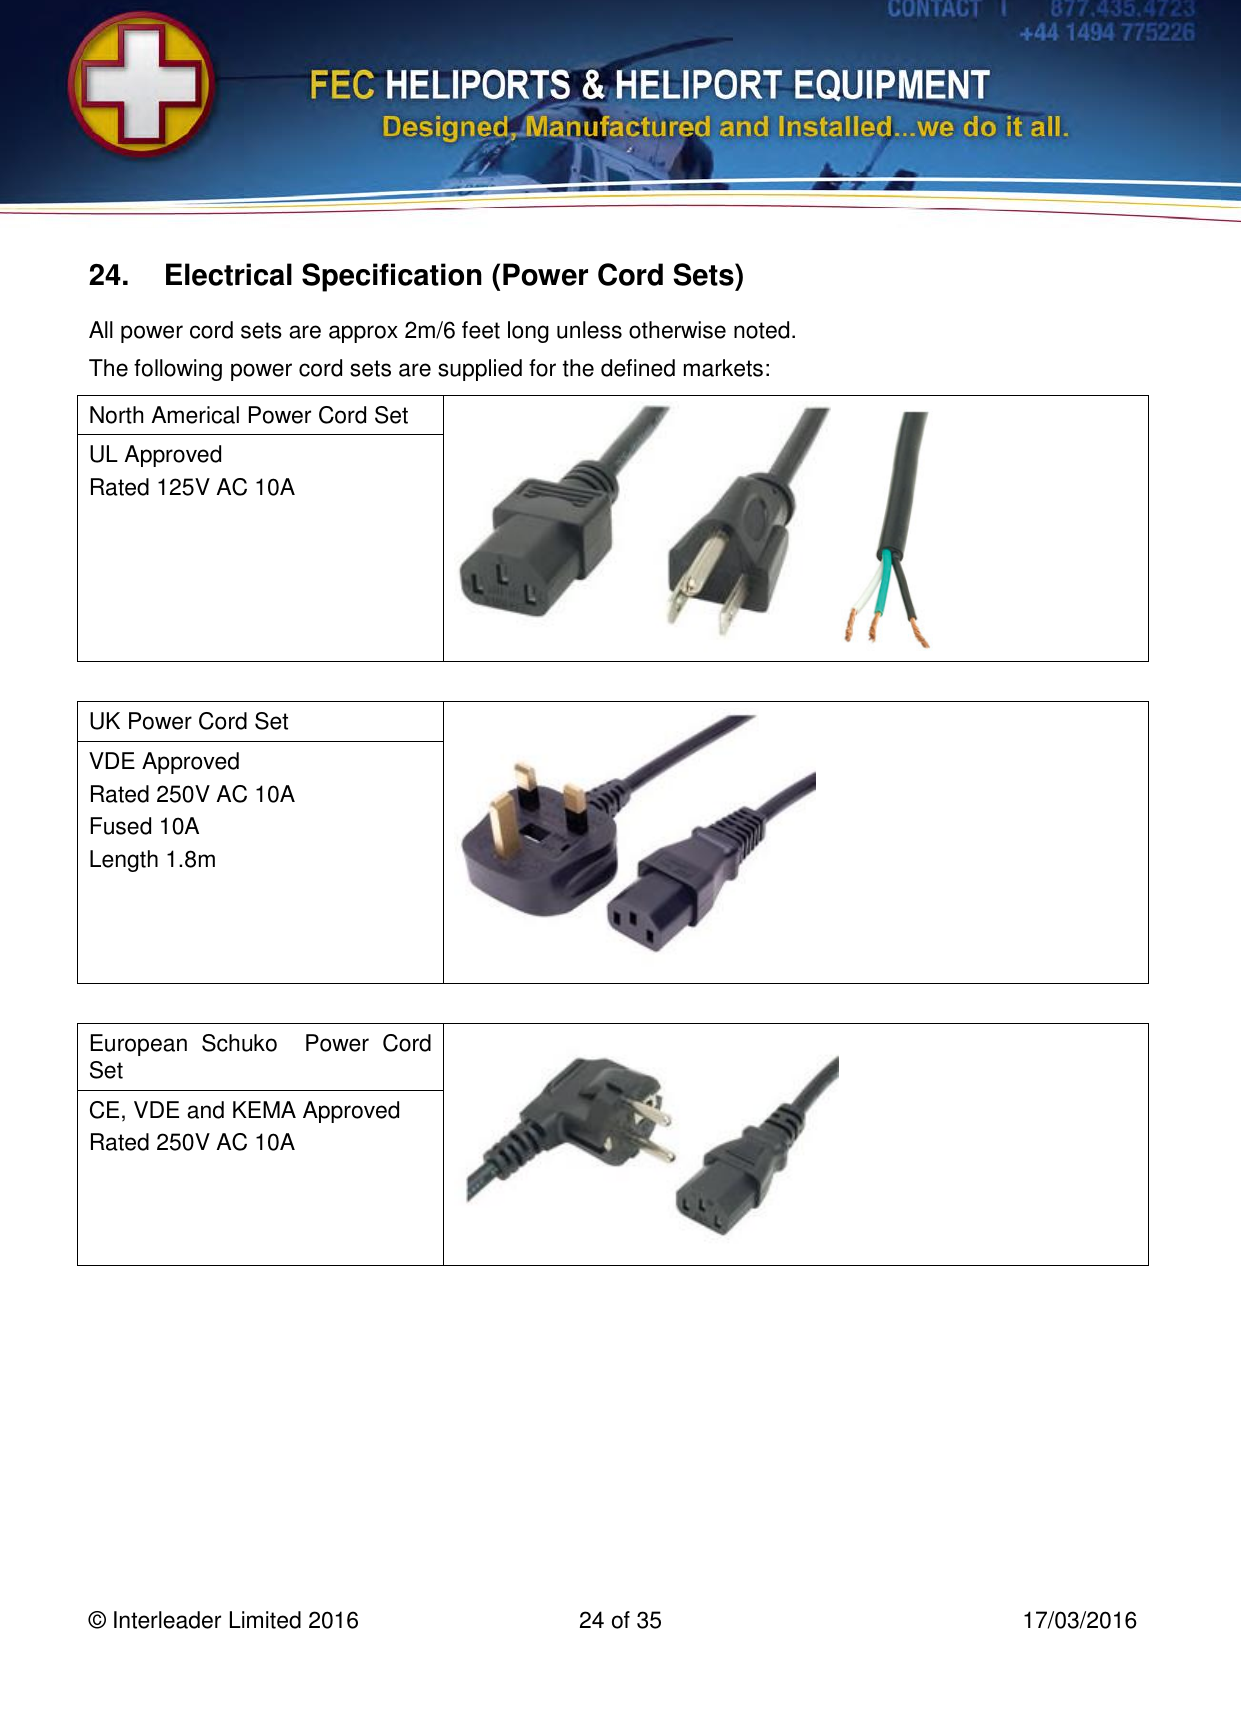   © Interleader Limited 2016  24 of 35  17/03/2016 24.  Electrical Specification (Power Cord Sets) All power cord sets are approx 2m/6 feet long unless otherwise noted. The following power cord sets are supplied for the defined markets:  North Americal Power Cord Set  UL Approved Rated 125V AC 10A   UK Power Cord Set  VDE Approved Rated 250V AC 10A Fused 10A Length 1.8m   European  Schuko    Power  Cord Set  CE, VDE and KEMA Approved Rated 250V AC 10A       